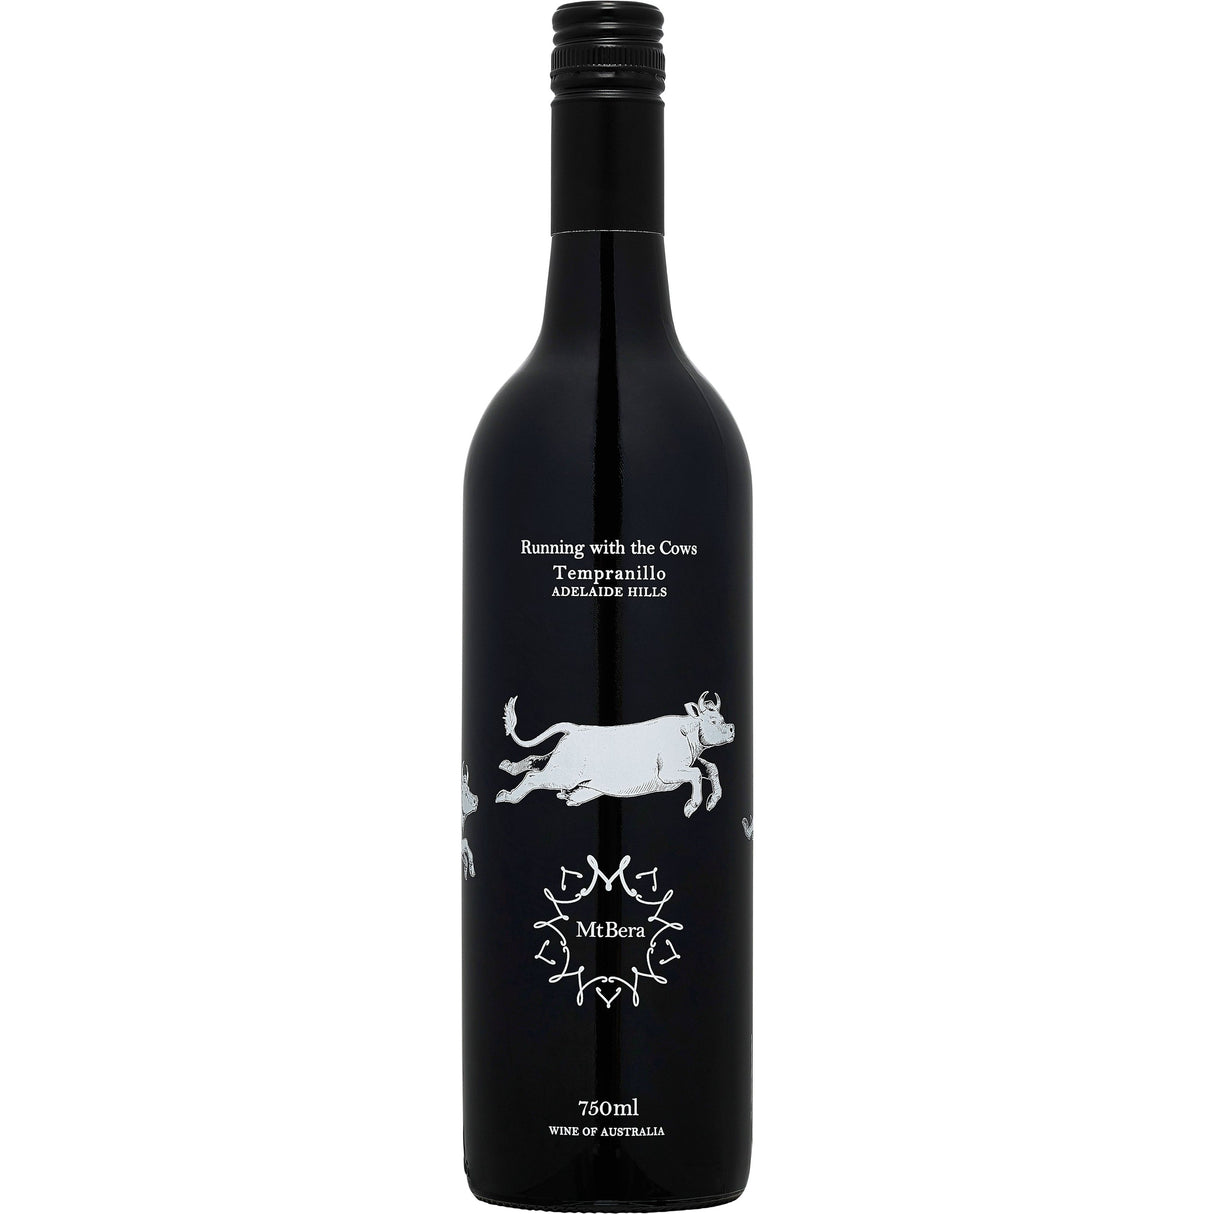 Mt Bera 'Running with the Cows' Tempranillo 2018 (12x750ml)